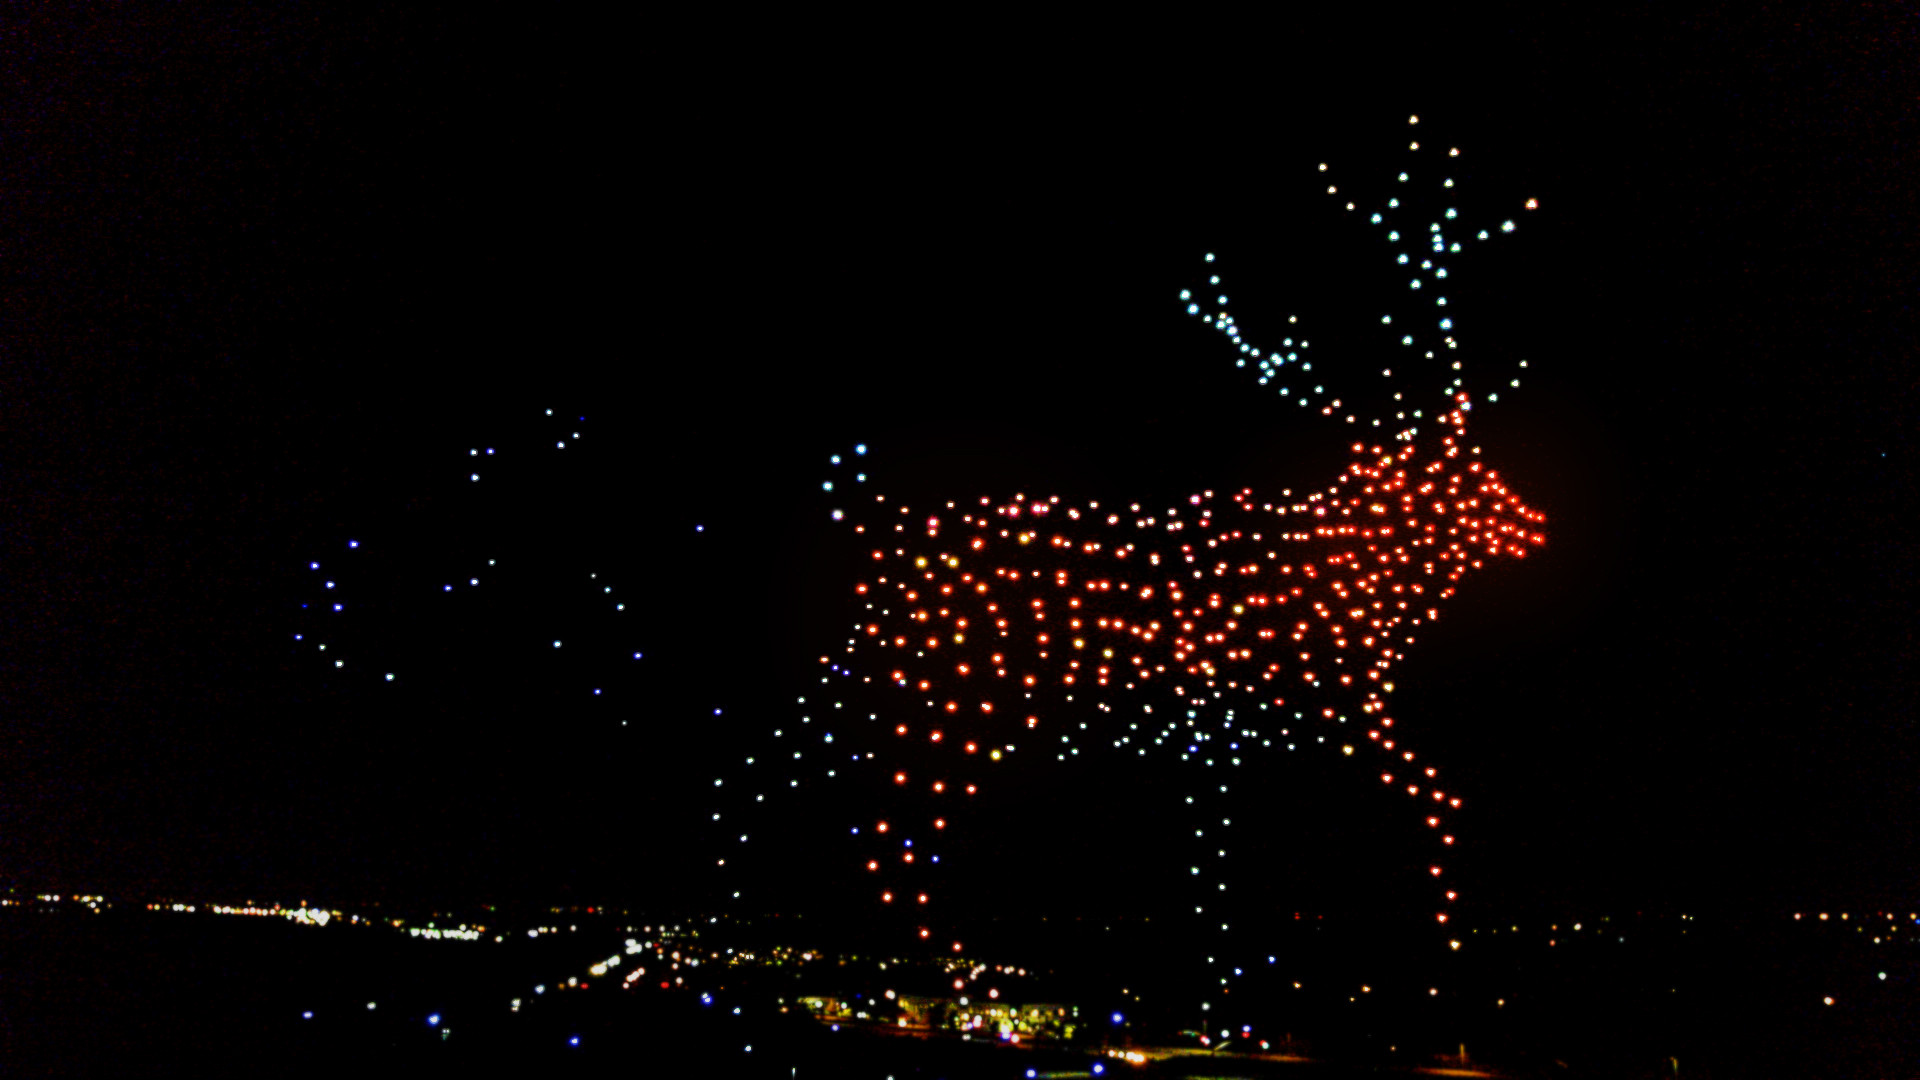 This Holiday Drone Light Show might be the coolest thing you'll see this holiday season